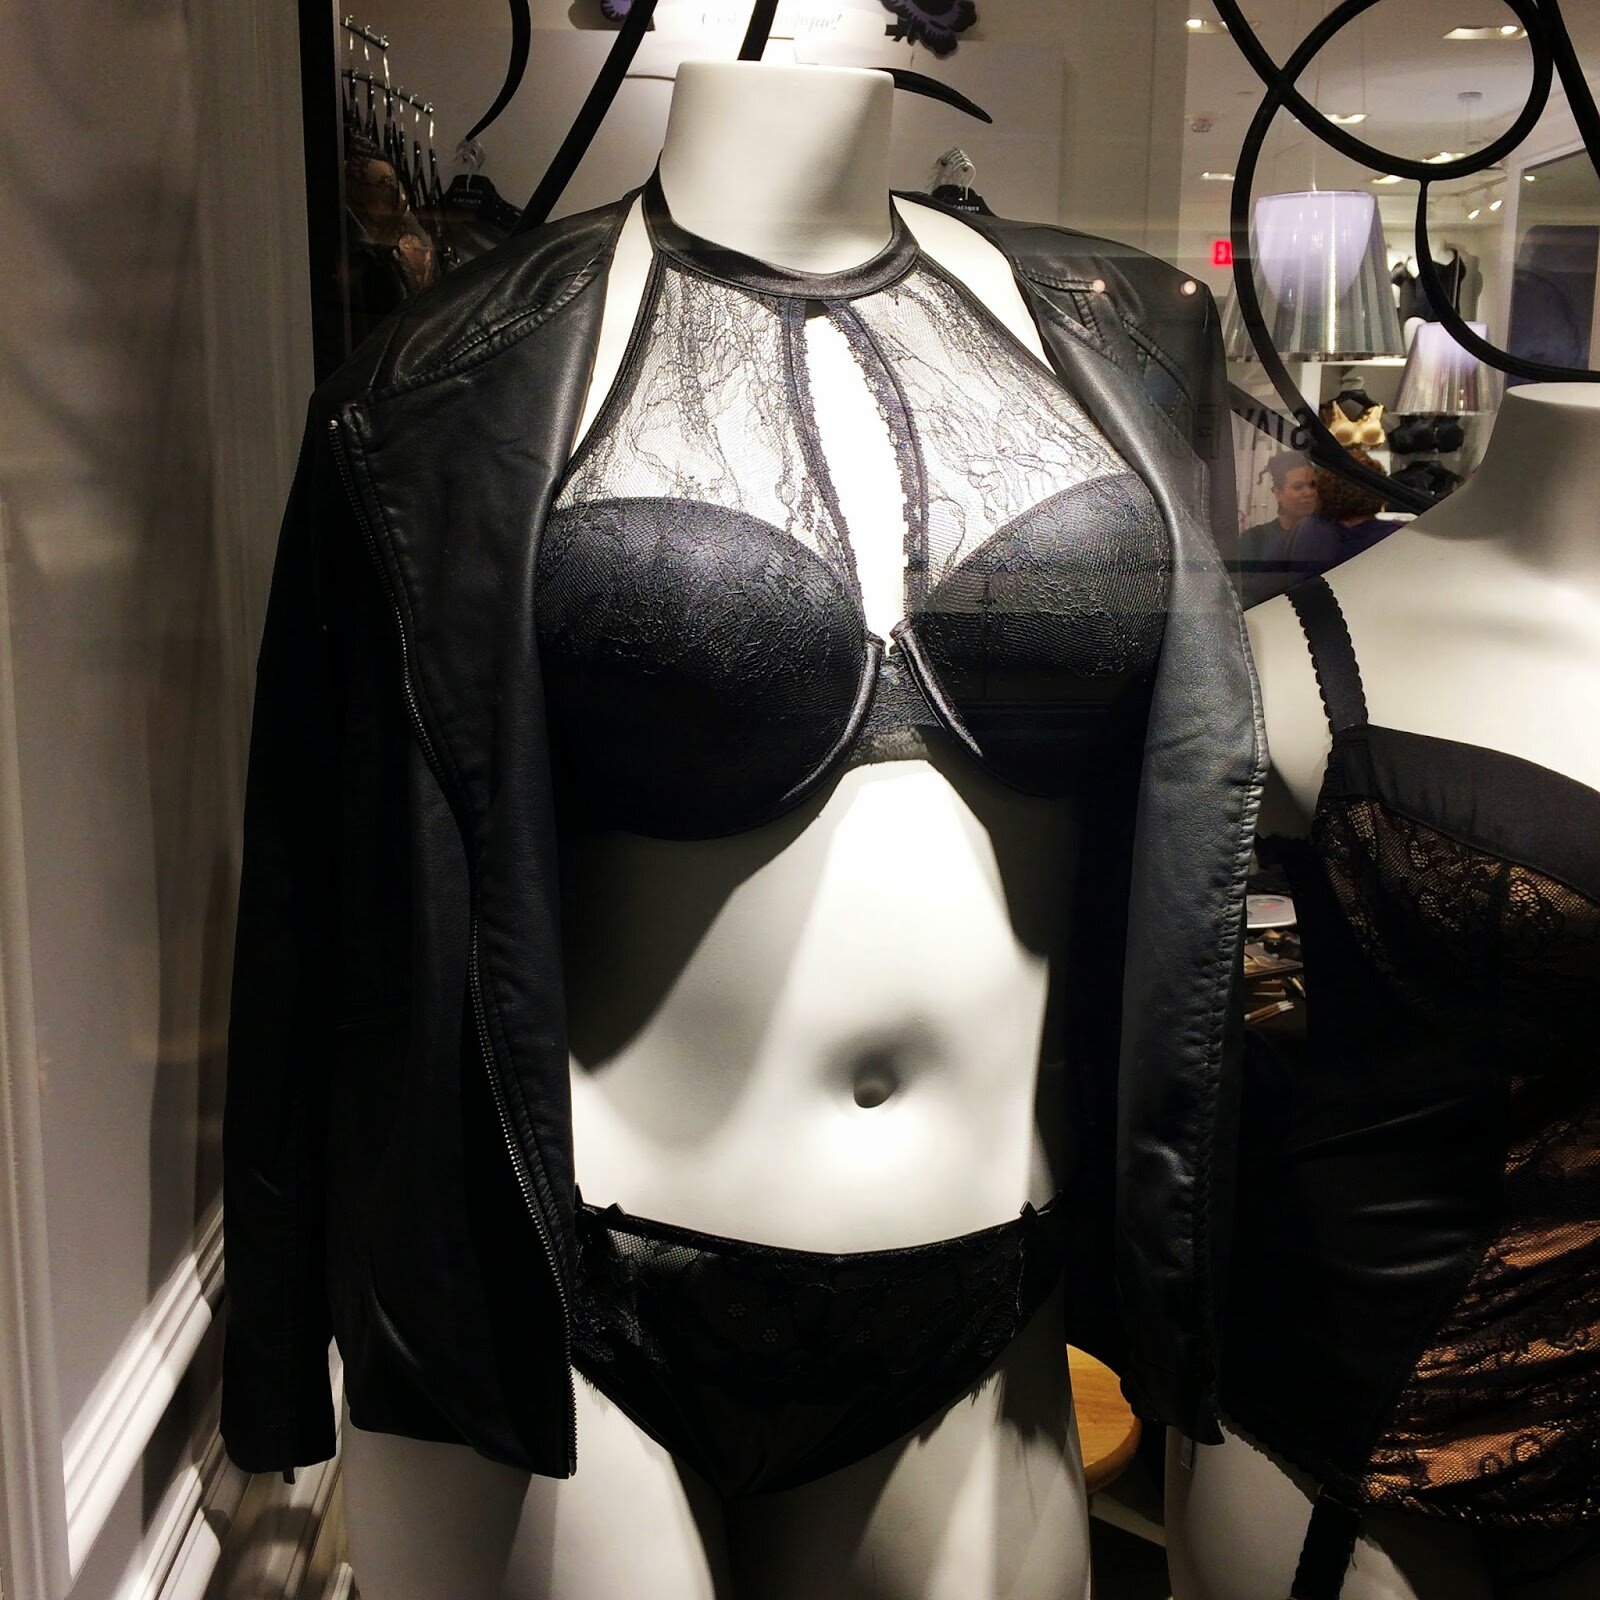 Out & About: Lane Bryant Cacique Lifestyle Store — Kelly Augustine